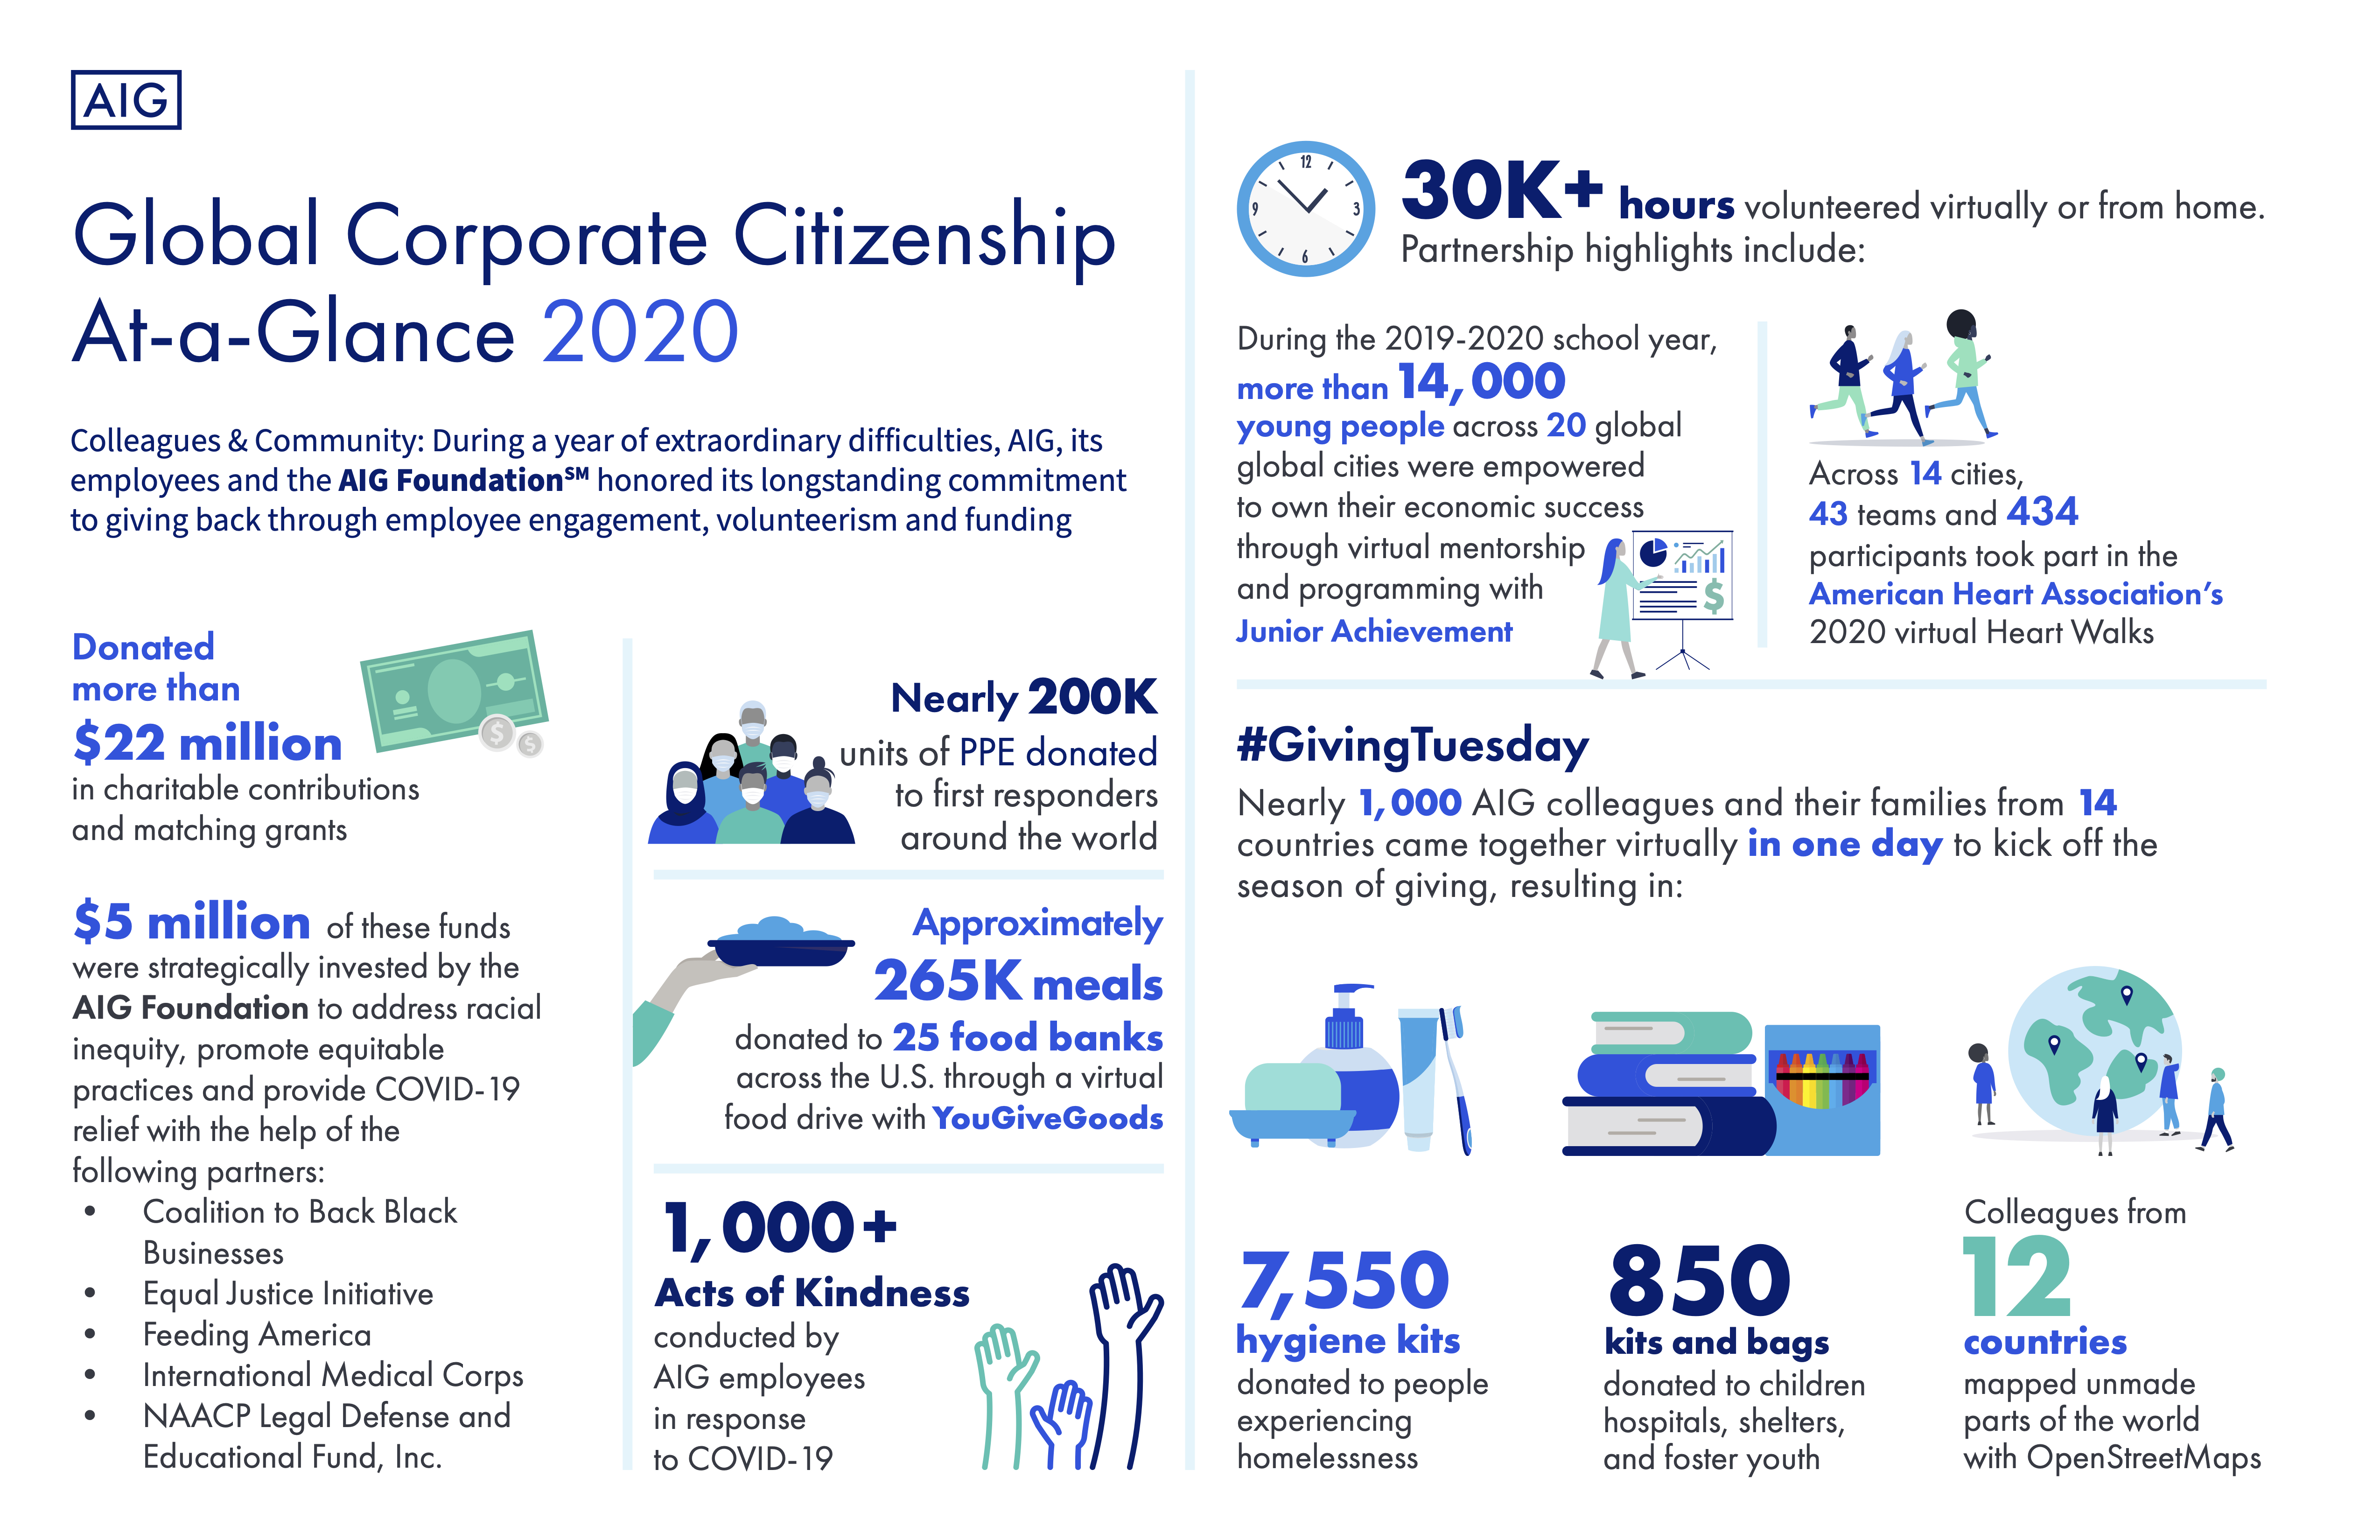 aig-citizenship-at-a-glance-2020-page1.jpg